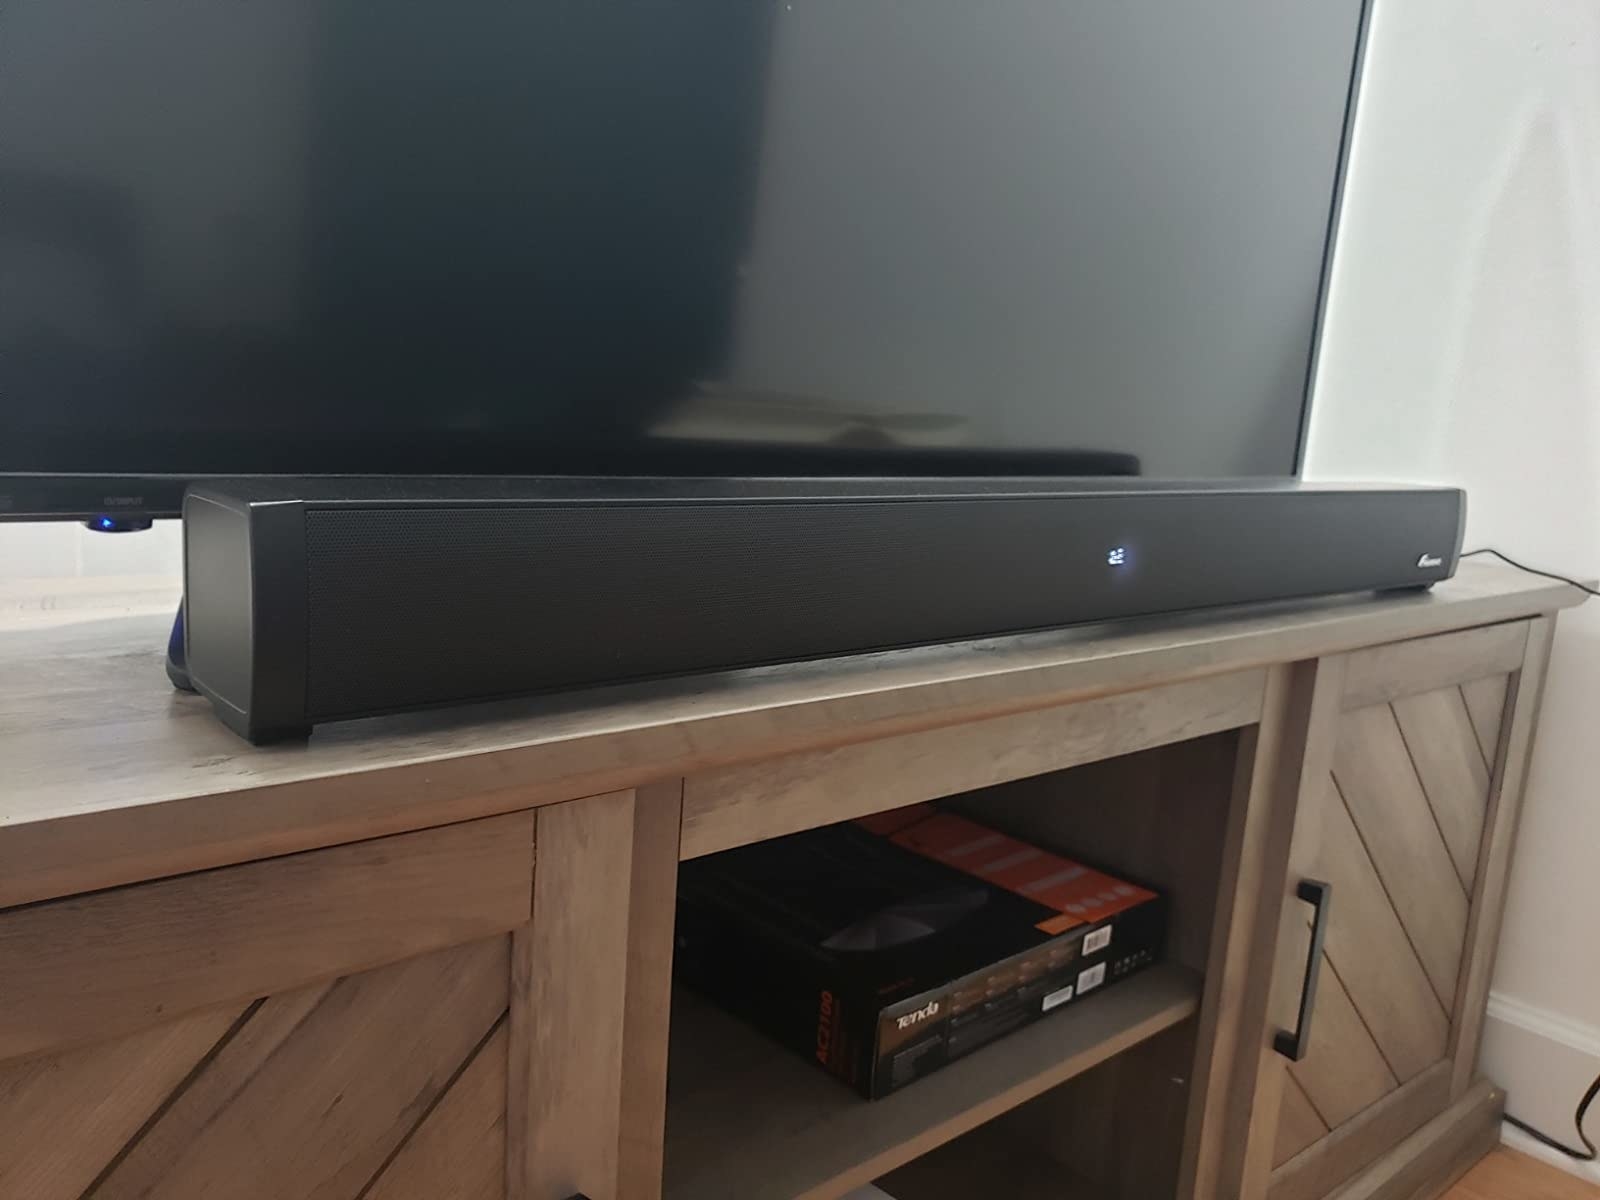 reviewer image of the foxnovo sound bar next to a TV on a TV stand